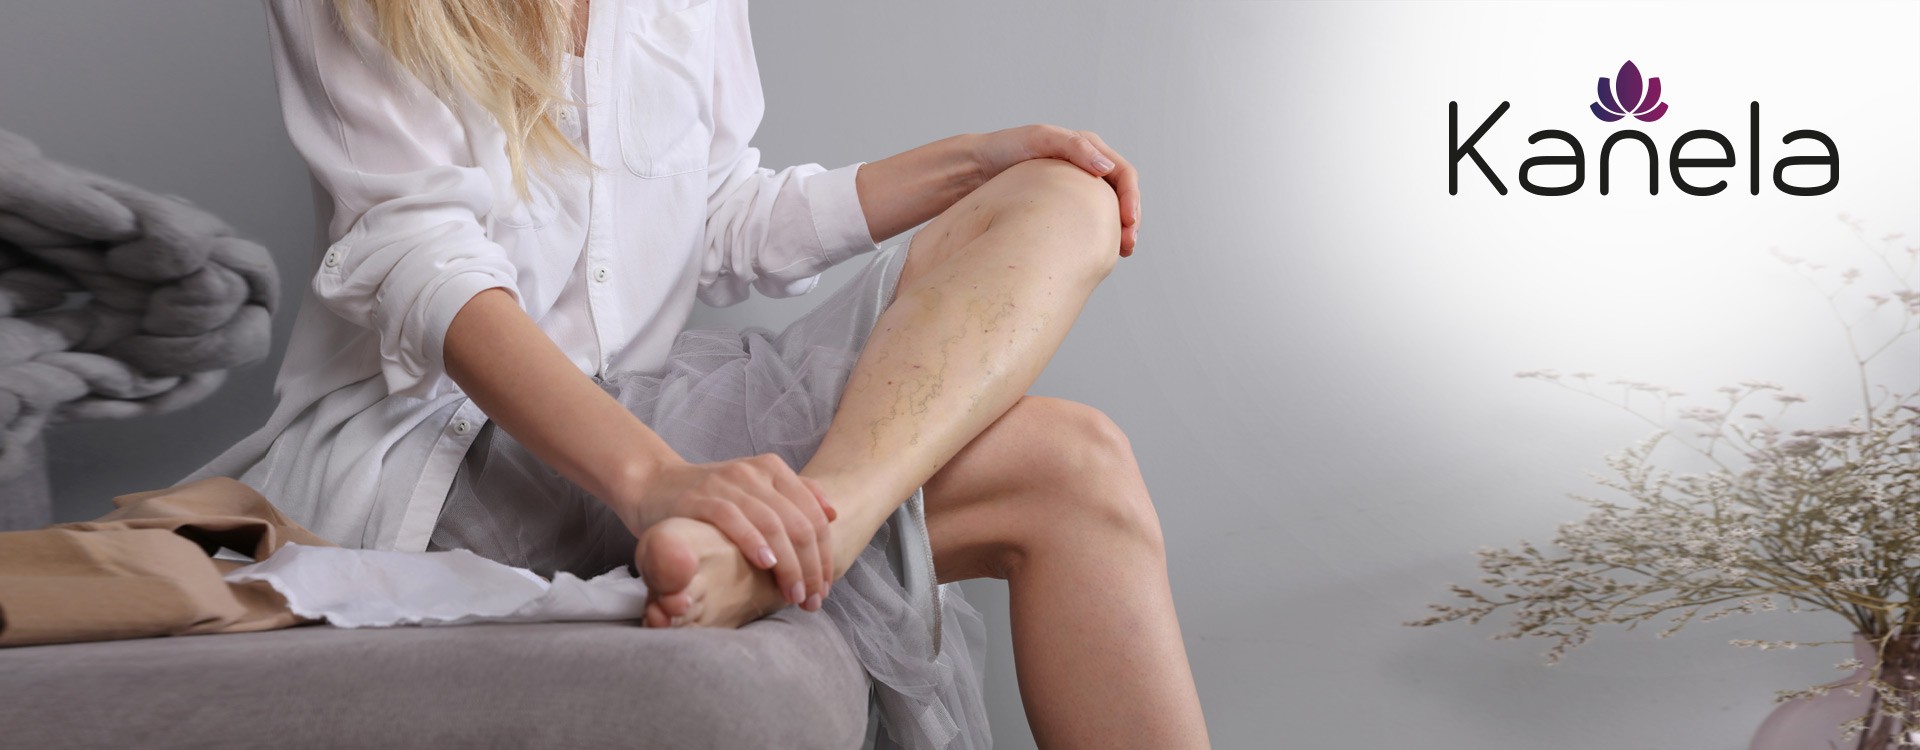 What to do with varicose veins?